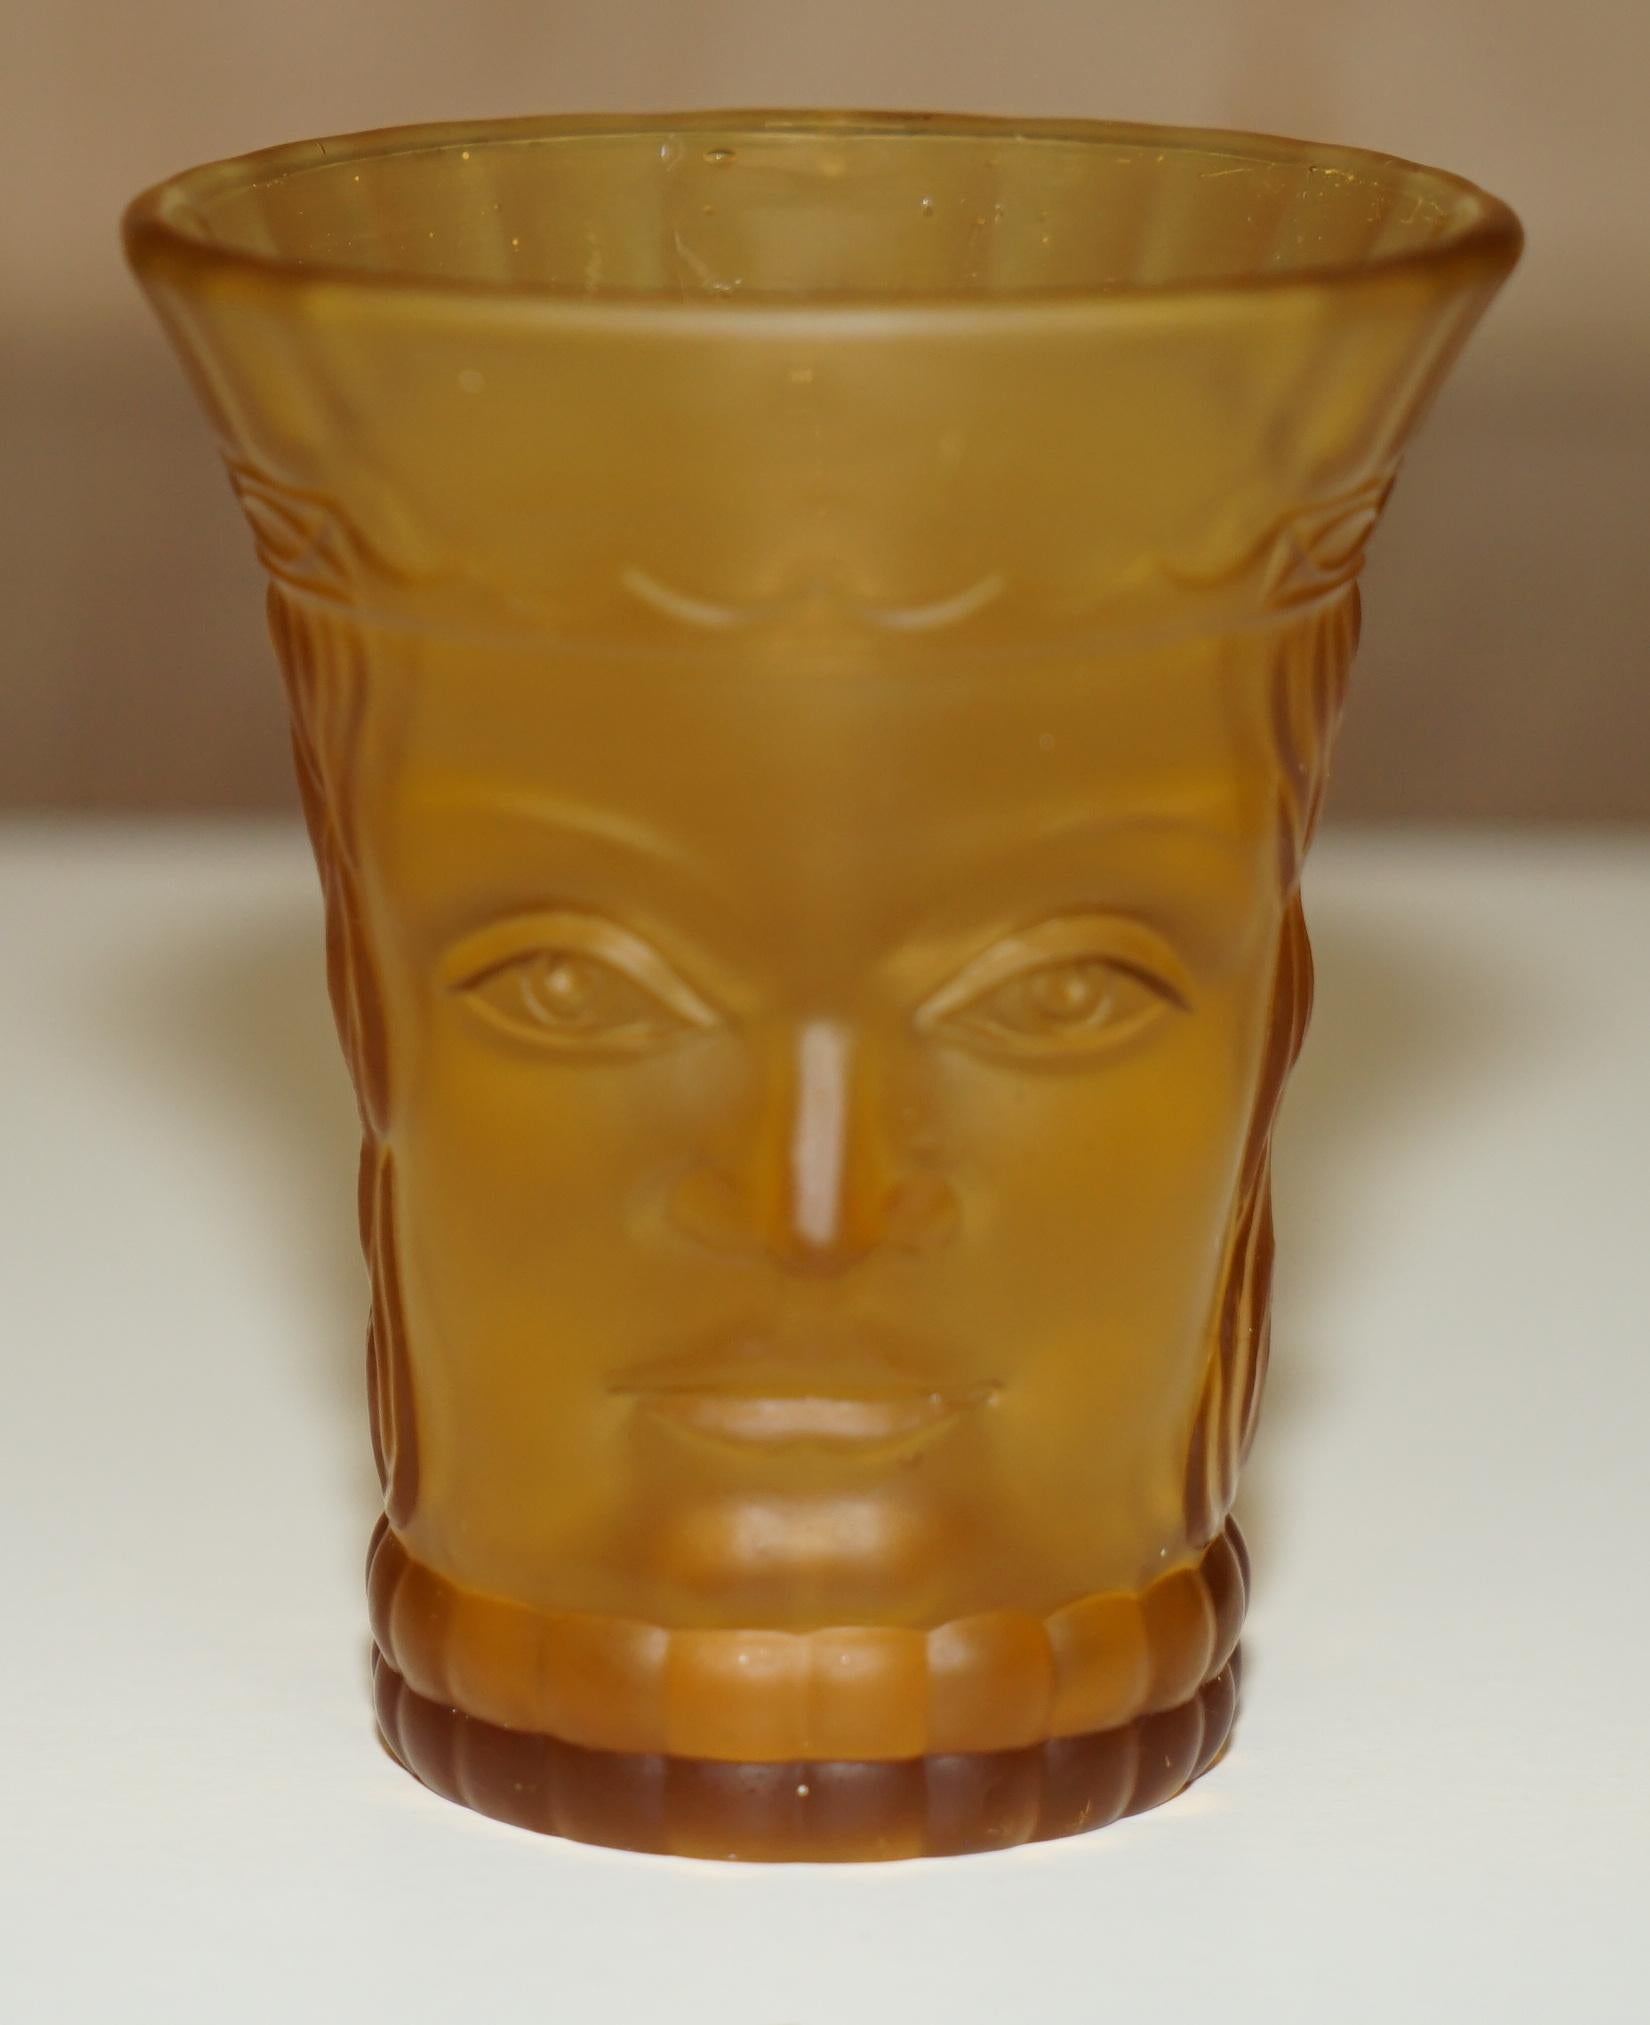 VINTAGE ART DECO CIRCA 1920'S AMBER FACE GLASS CUP SET WITH LARGE PiTCHER JUG For Sale 4